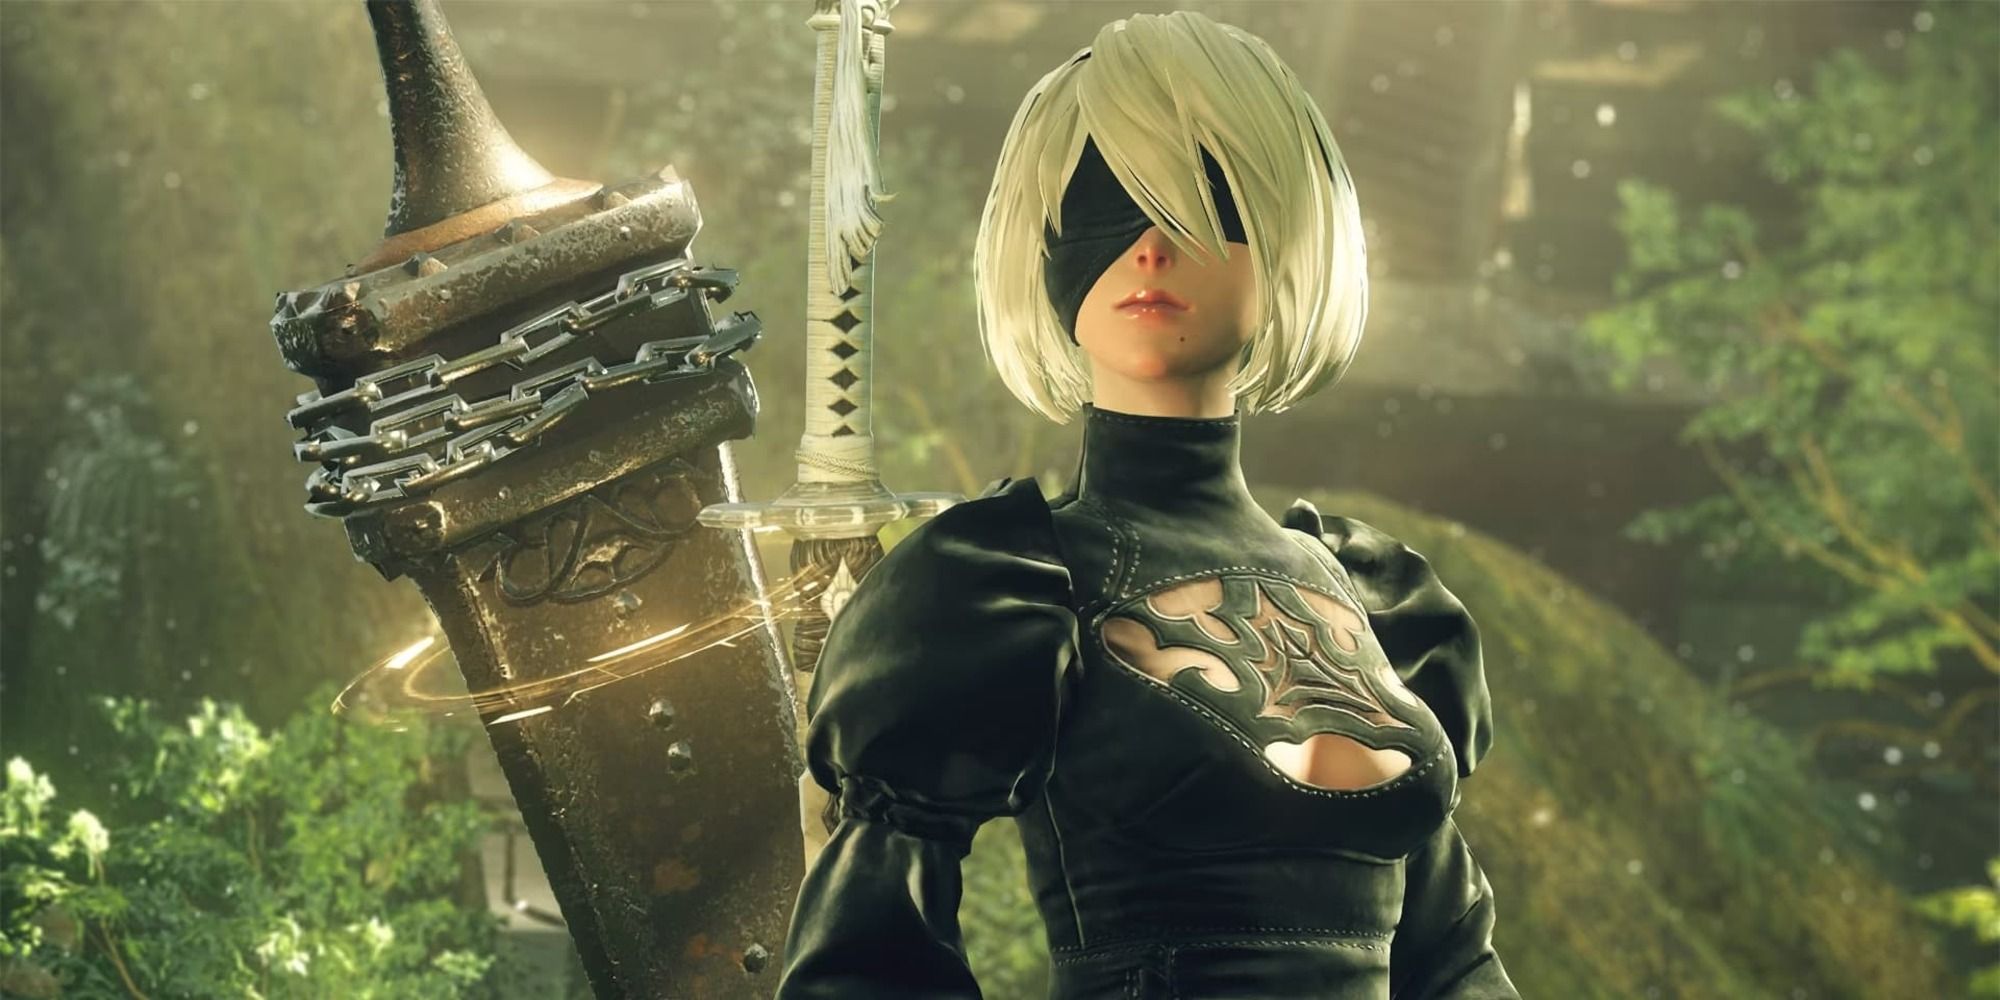 A woman with an eyepatch stands in a garden area in NieR Automata